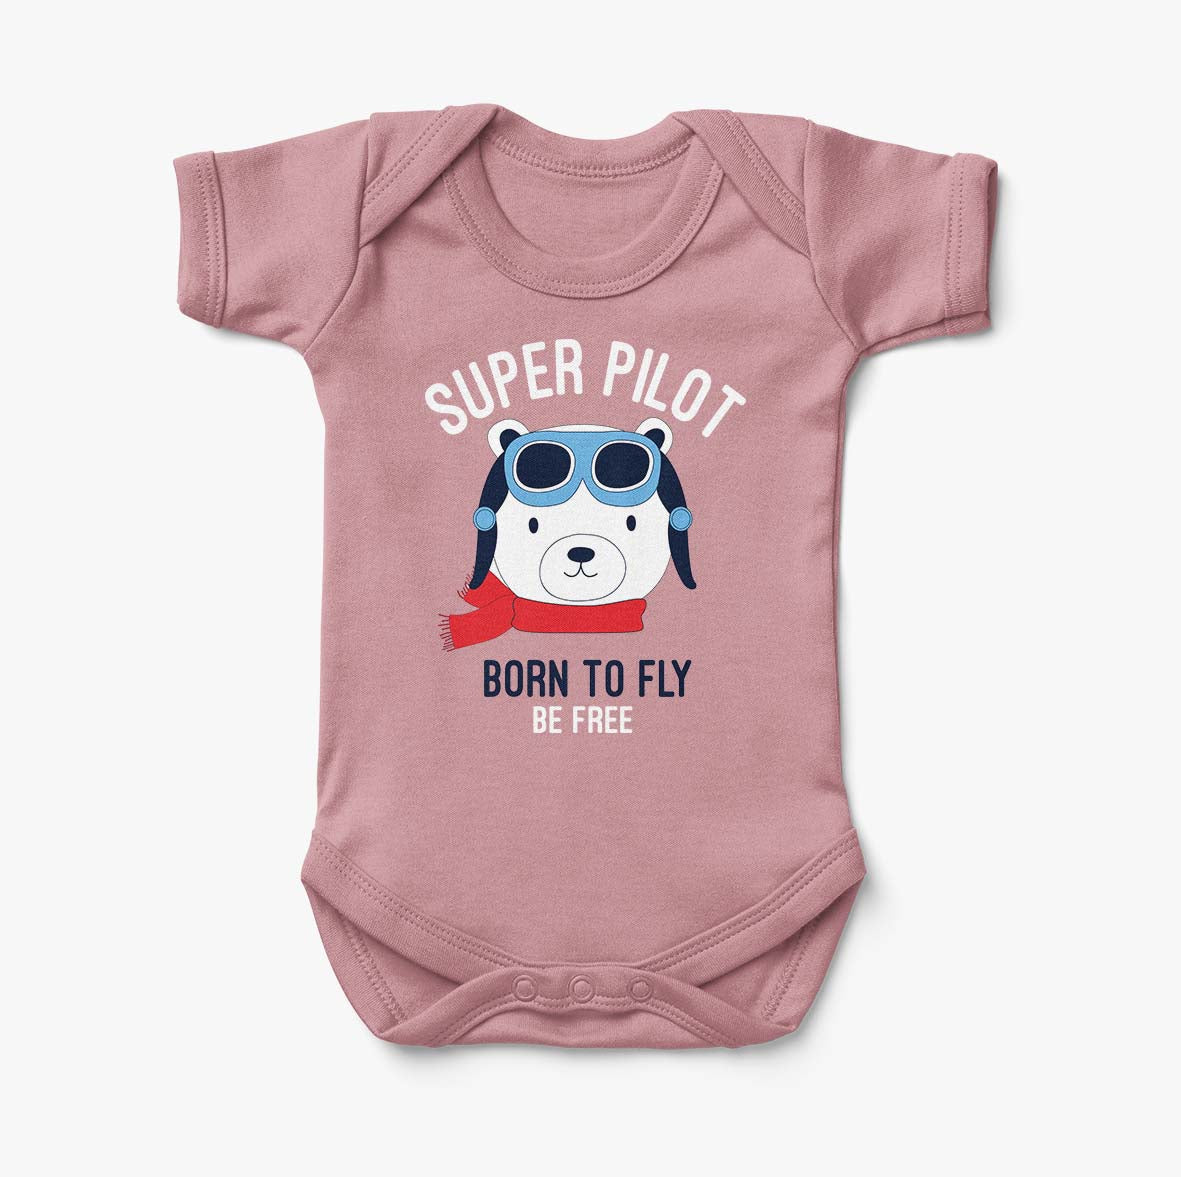 Super Pilot - Born To Fly Designed Baby Bodysuits